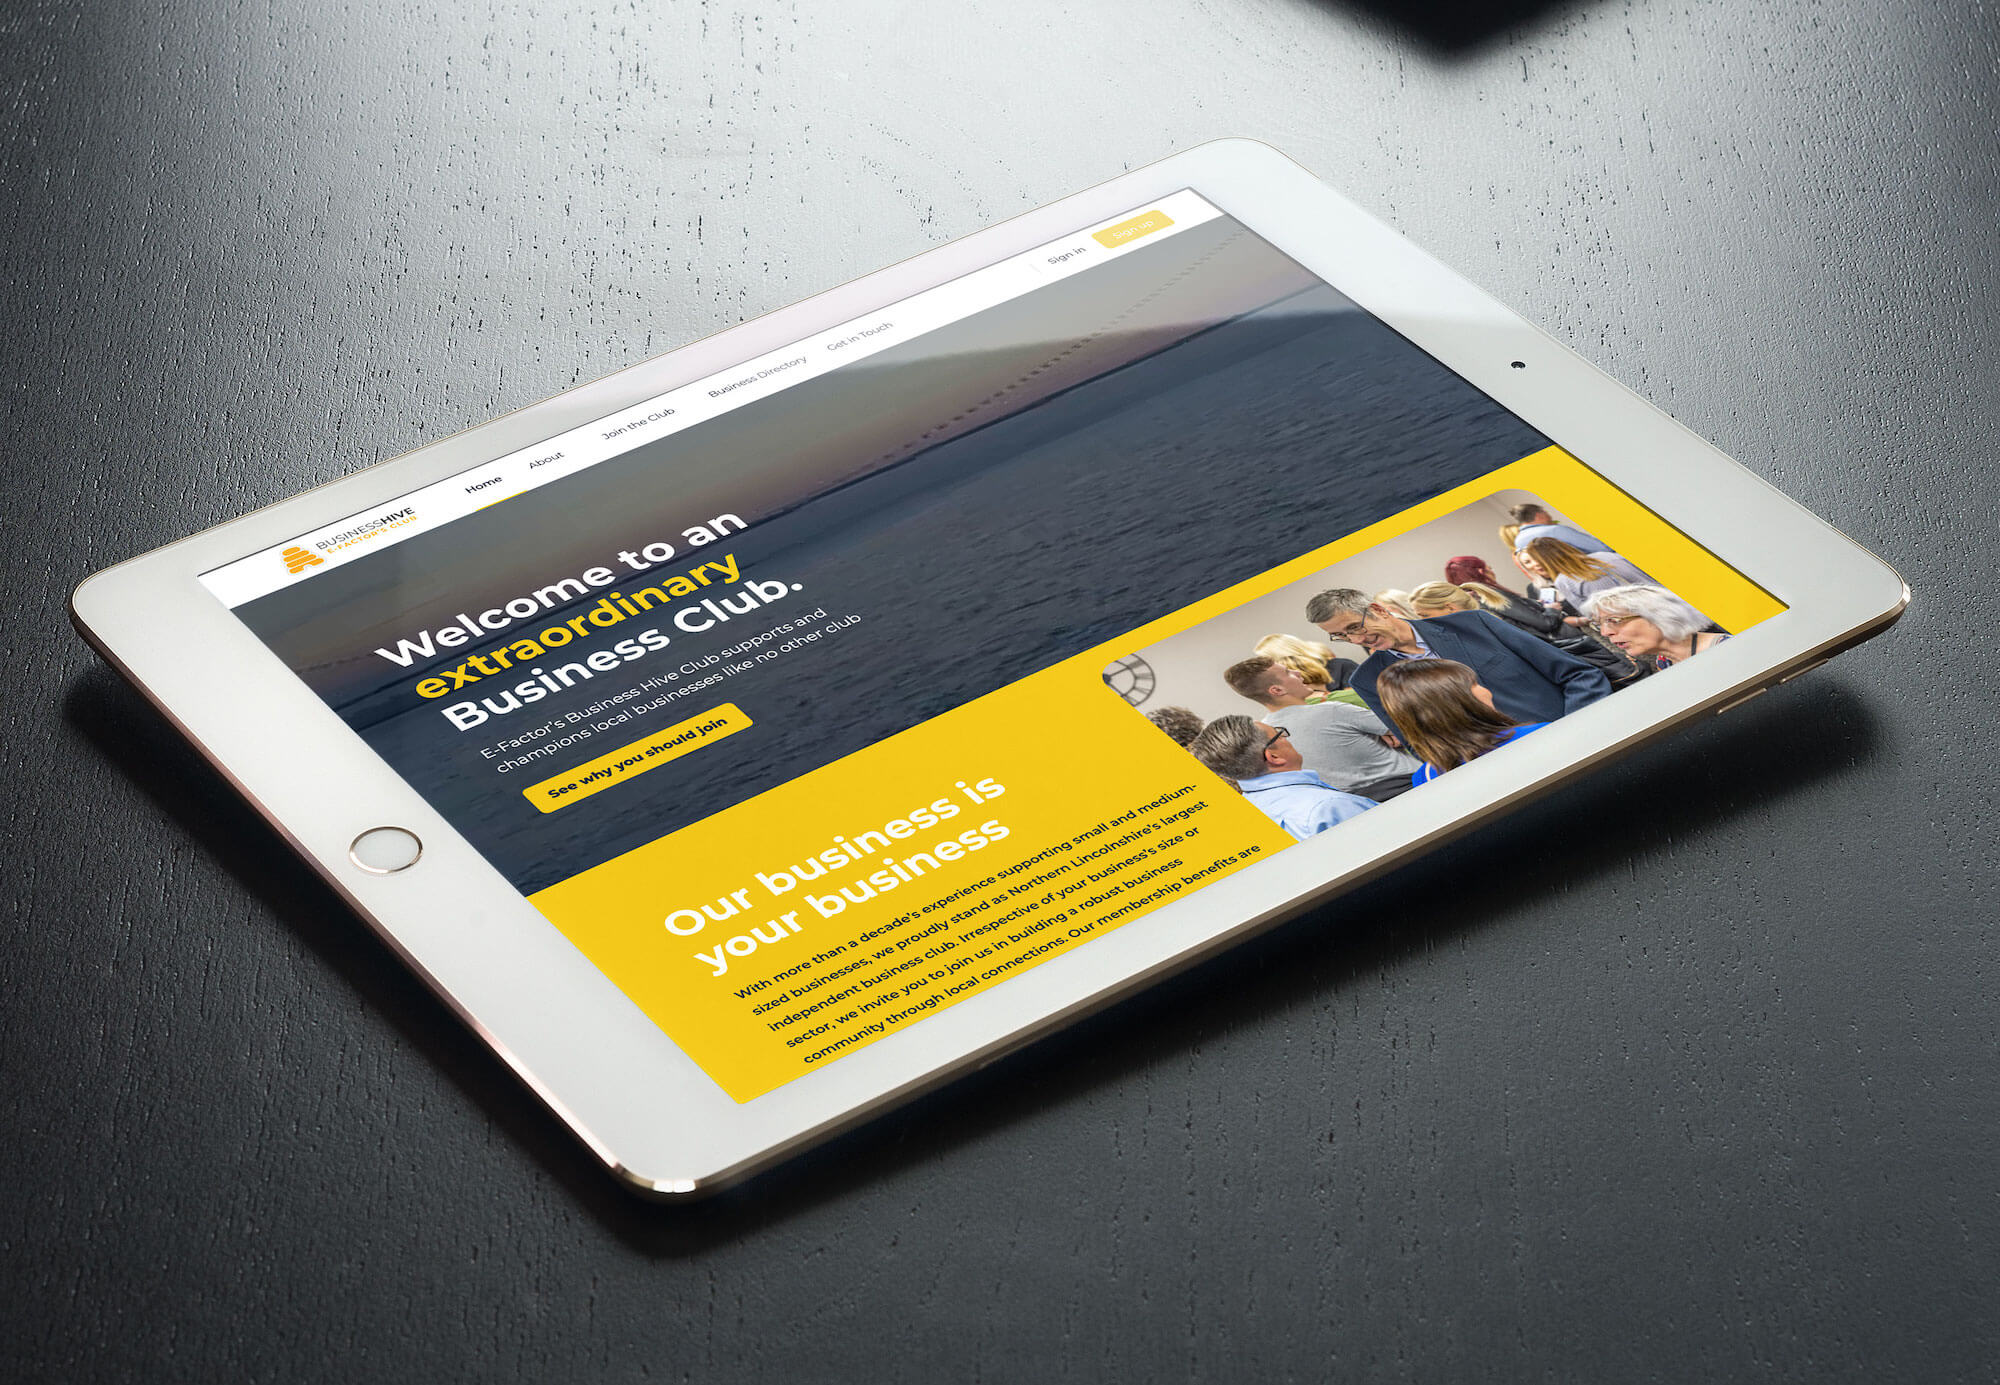 An iPad showcasing E-Factor's Business Hive, a new exclusive member hub for business clubs.